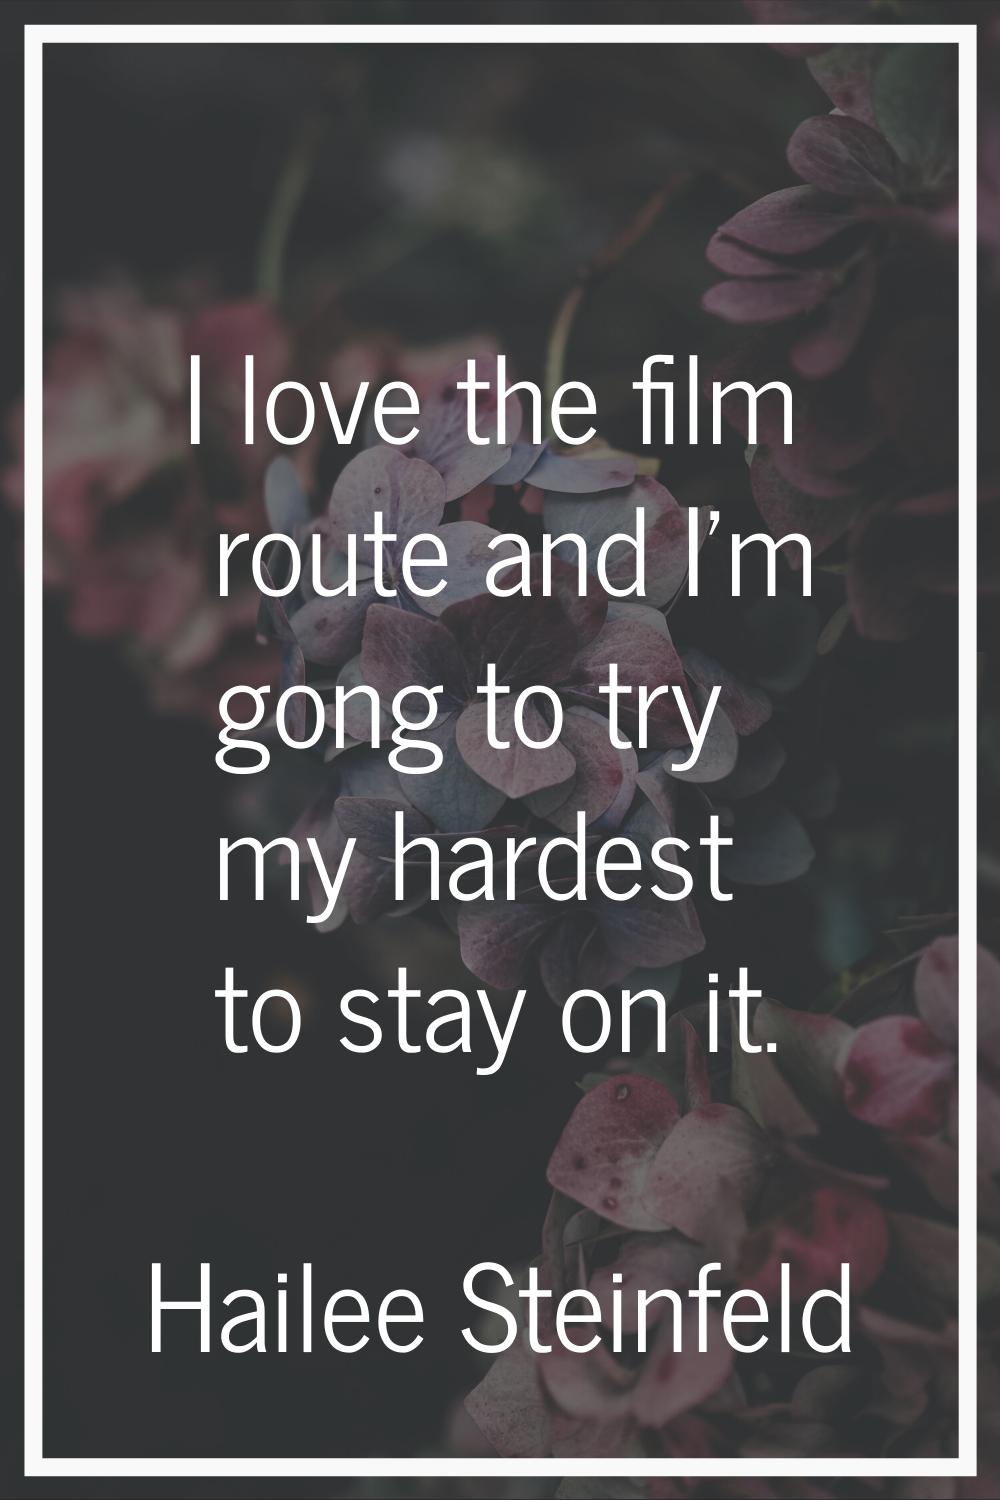 I love the film route and I'm gong to try my hardest to stay on it.